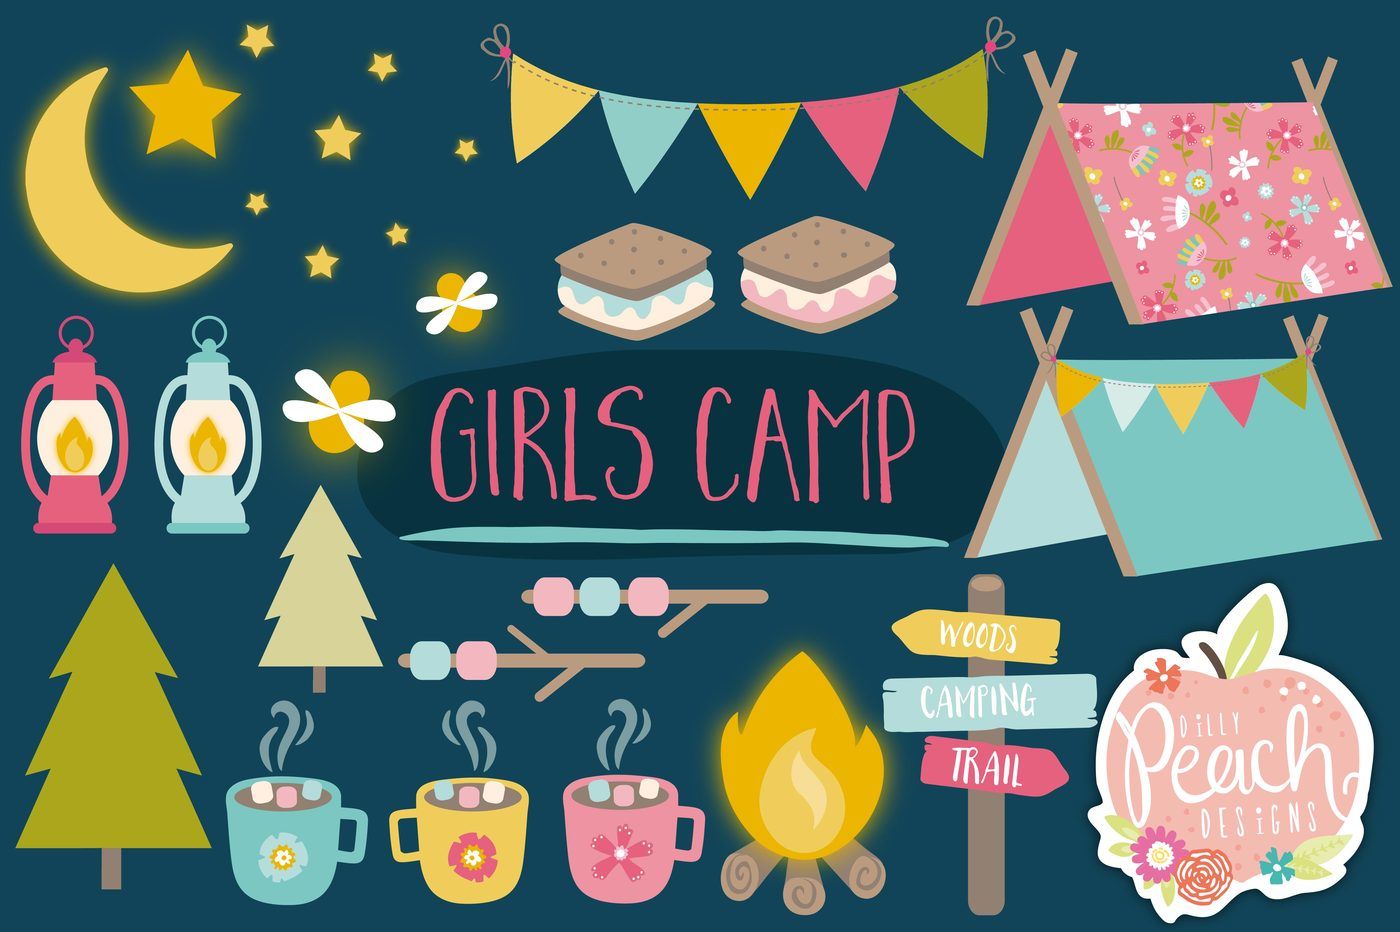 Girls Camping Clipart By DillyPeach Designs 